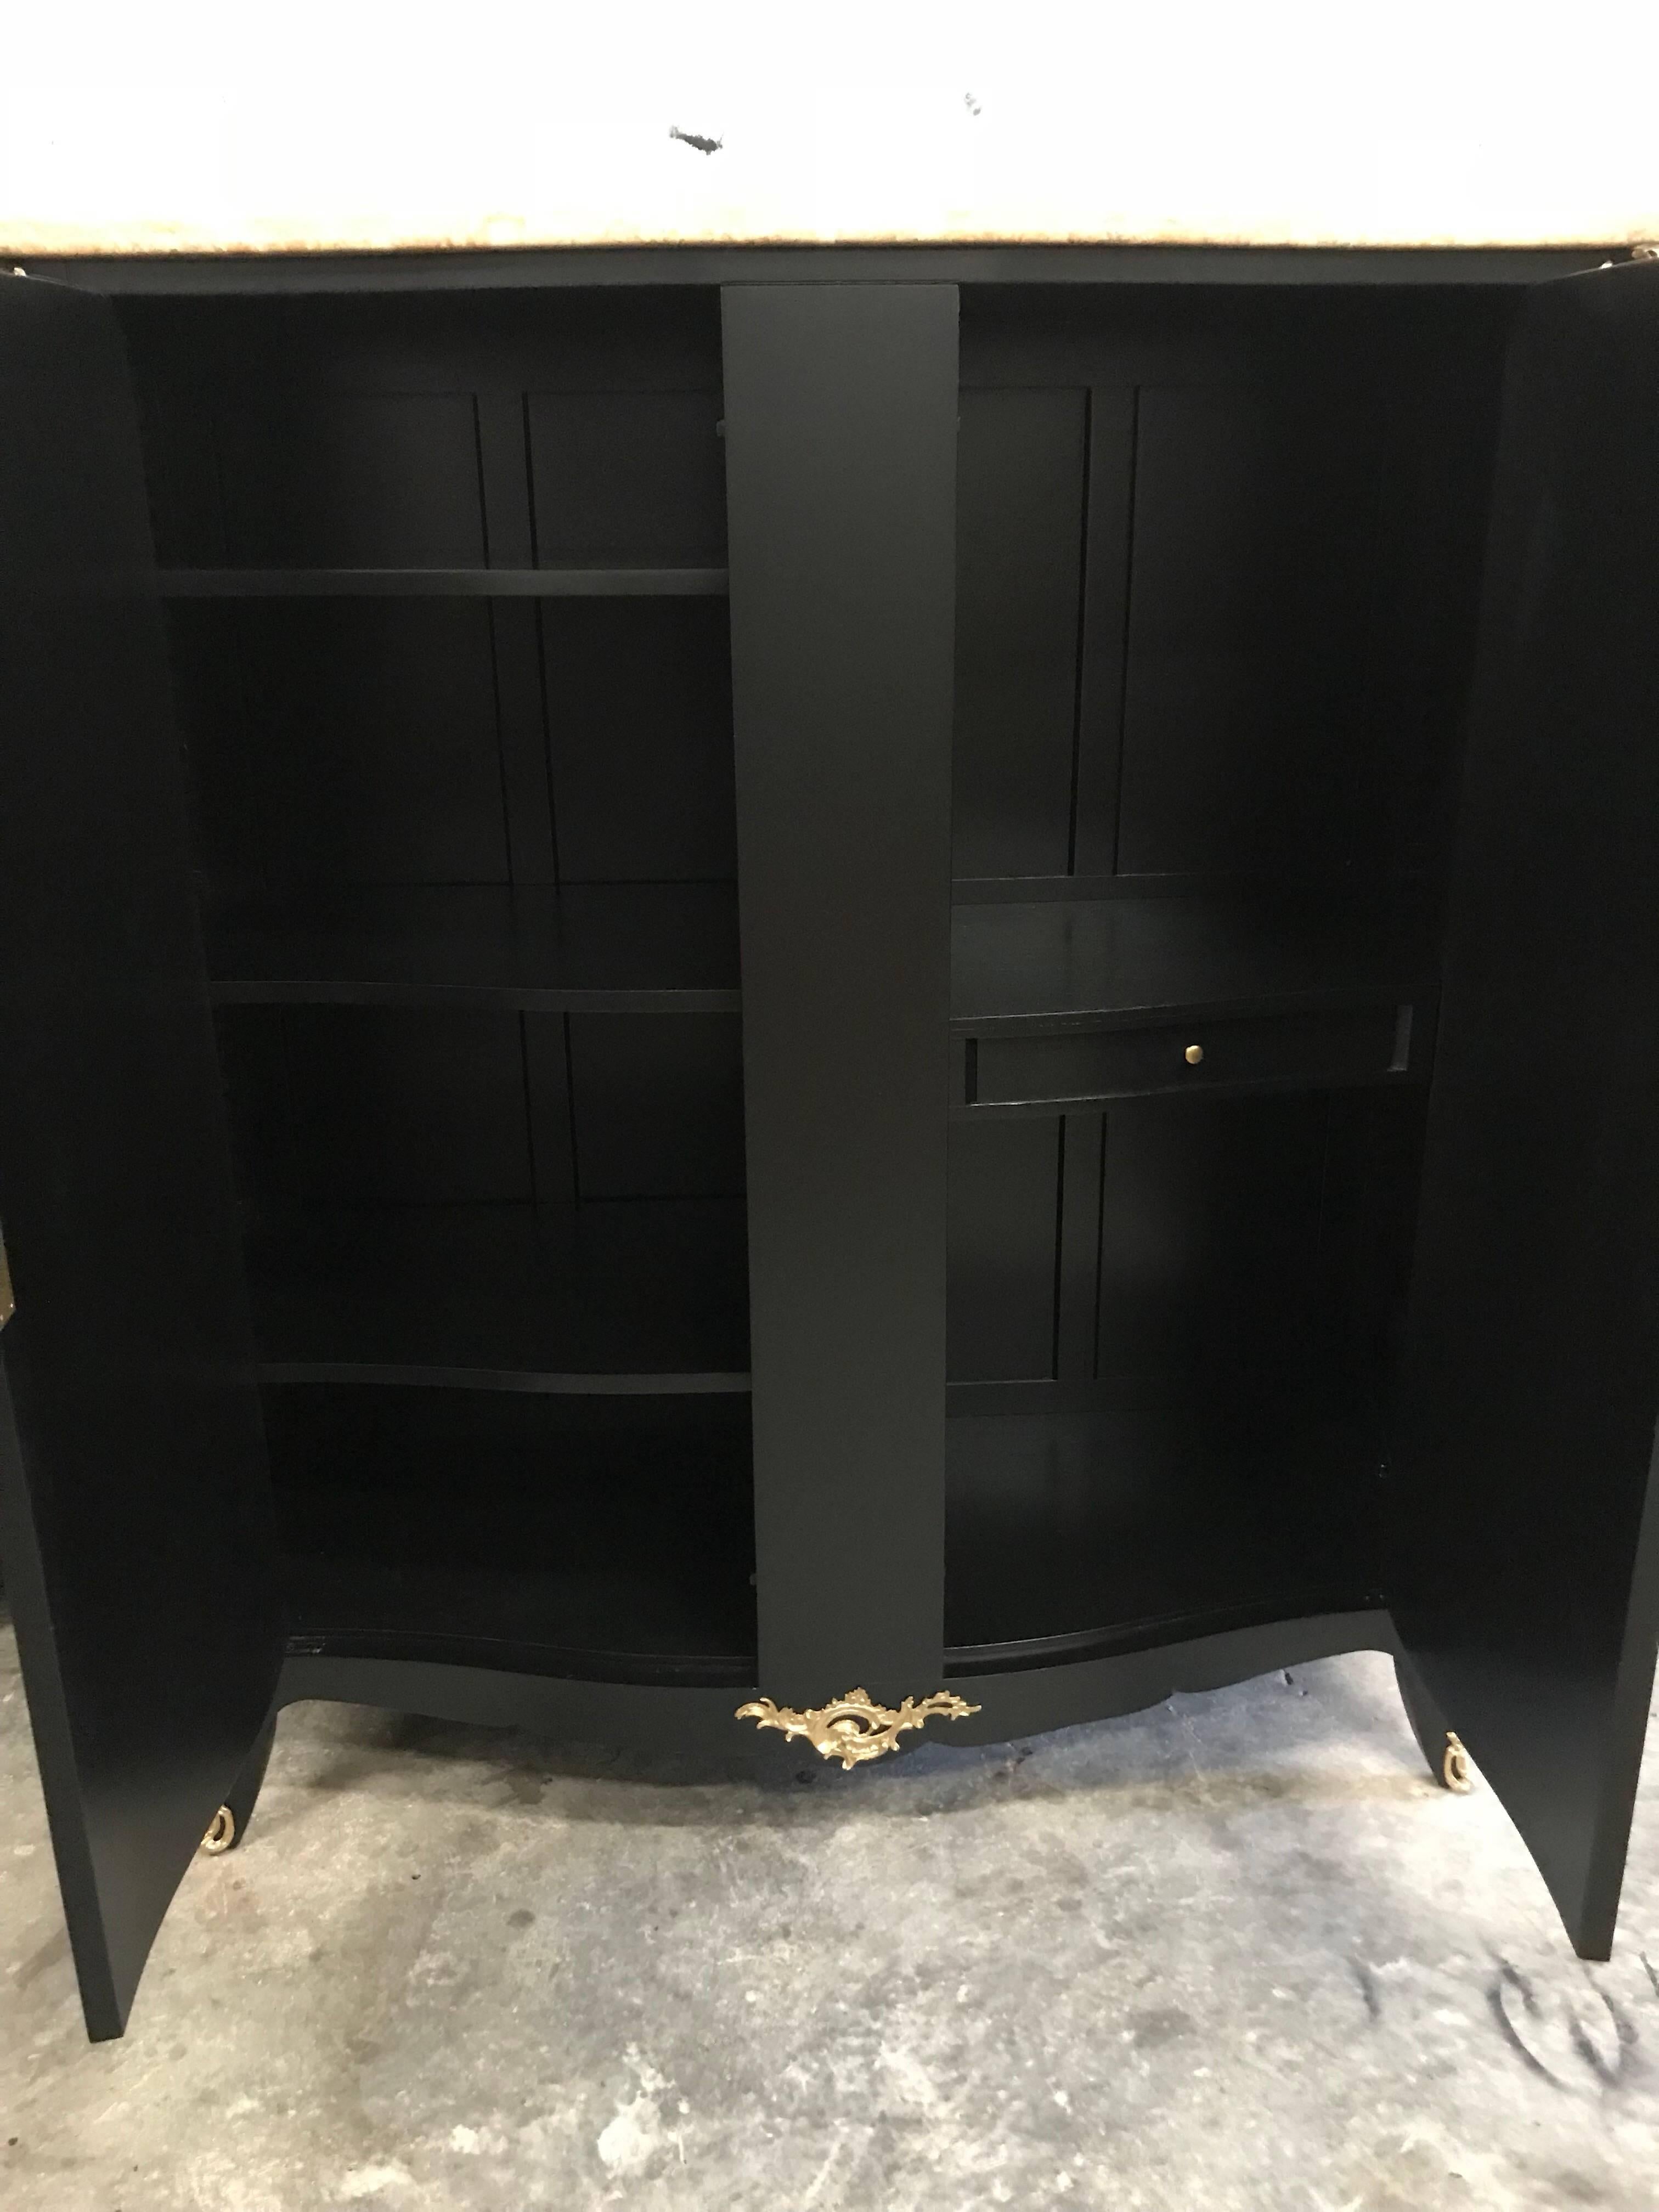 Monumental French Art Deco ebonized dry bar or cabinet with marble top, with all shelves adjustable and we have extra shelves for the bar. The bar are beautiful with bronze hardware detail, and the beautiful color of the marble top ,Newly lacquered